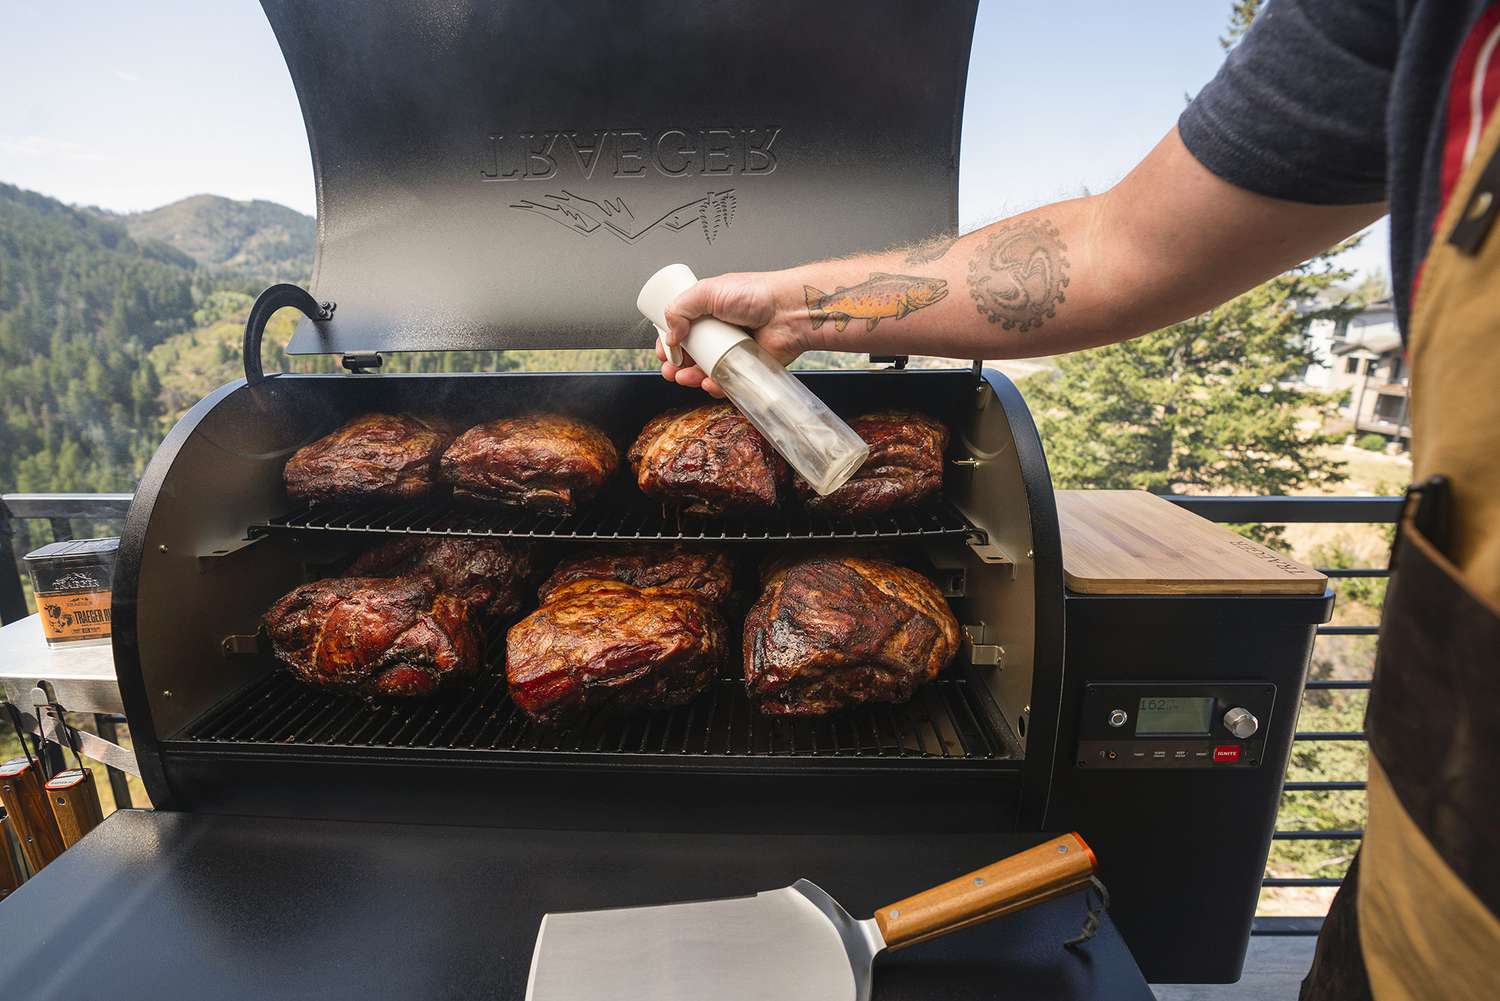 Traeger Ironwood 855 pellet grill loaded up with smoked meats